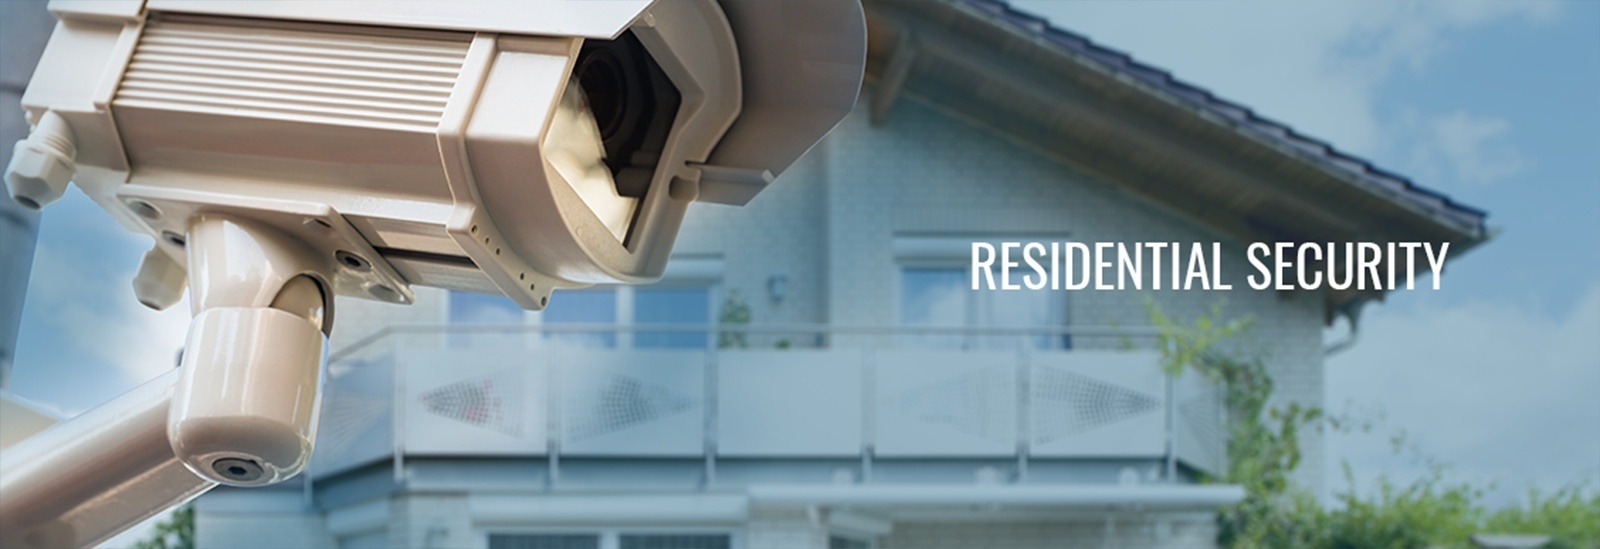 Residential Security System Services by Sky Security Ltd. -Commercial Security System Installation Langley